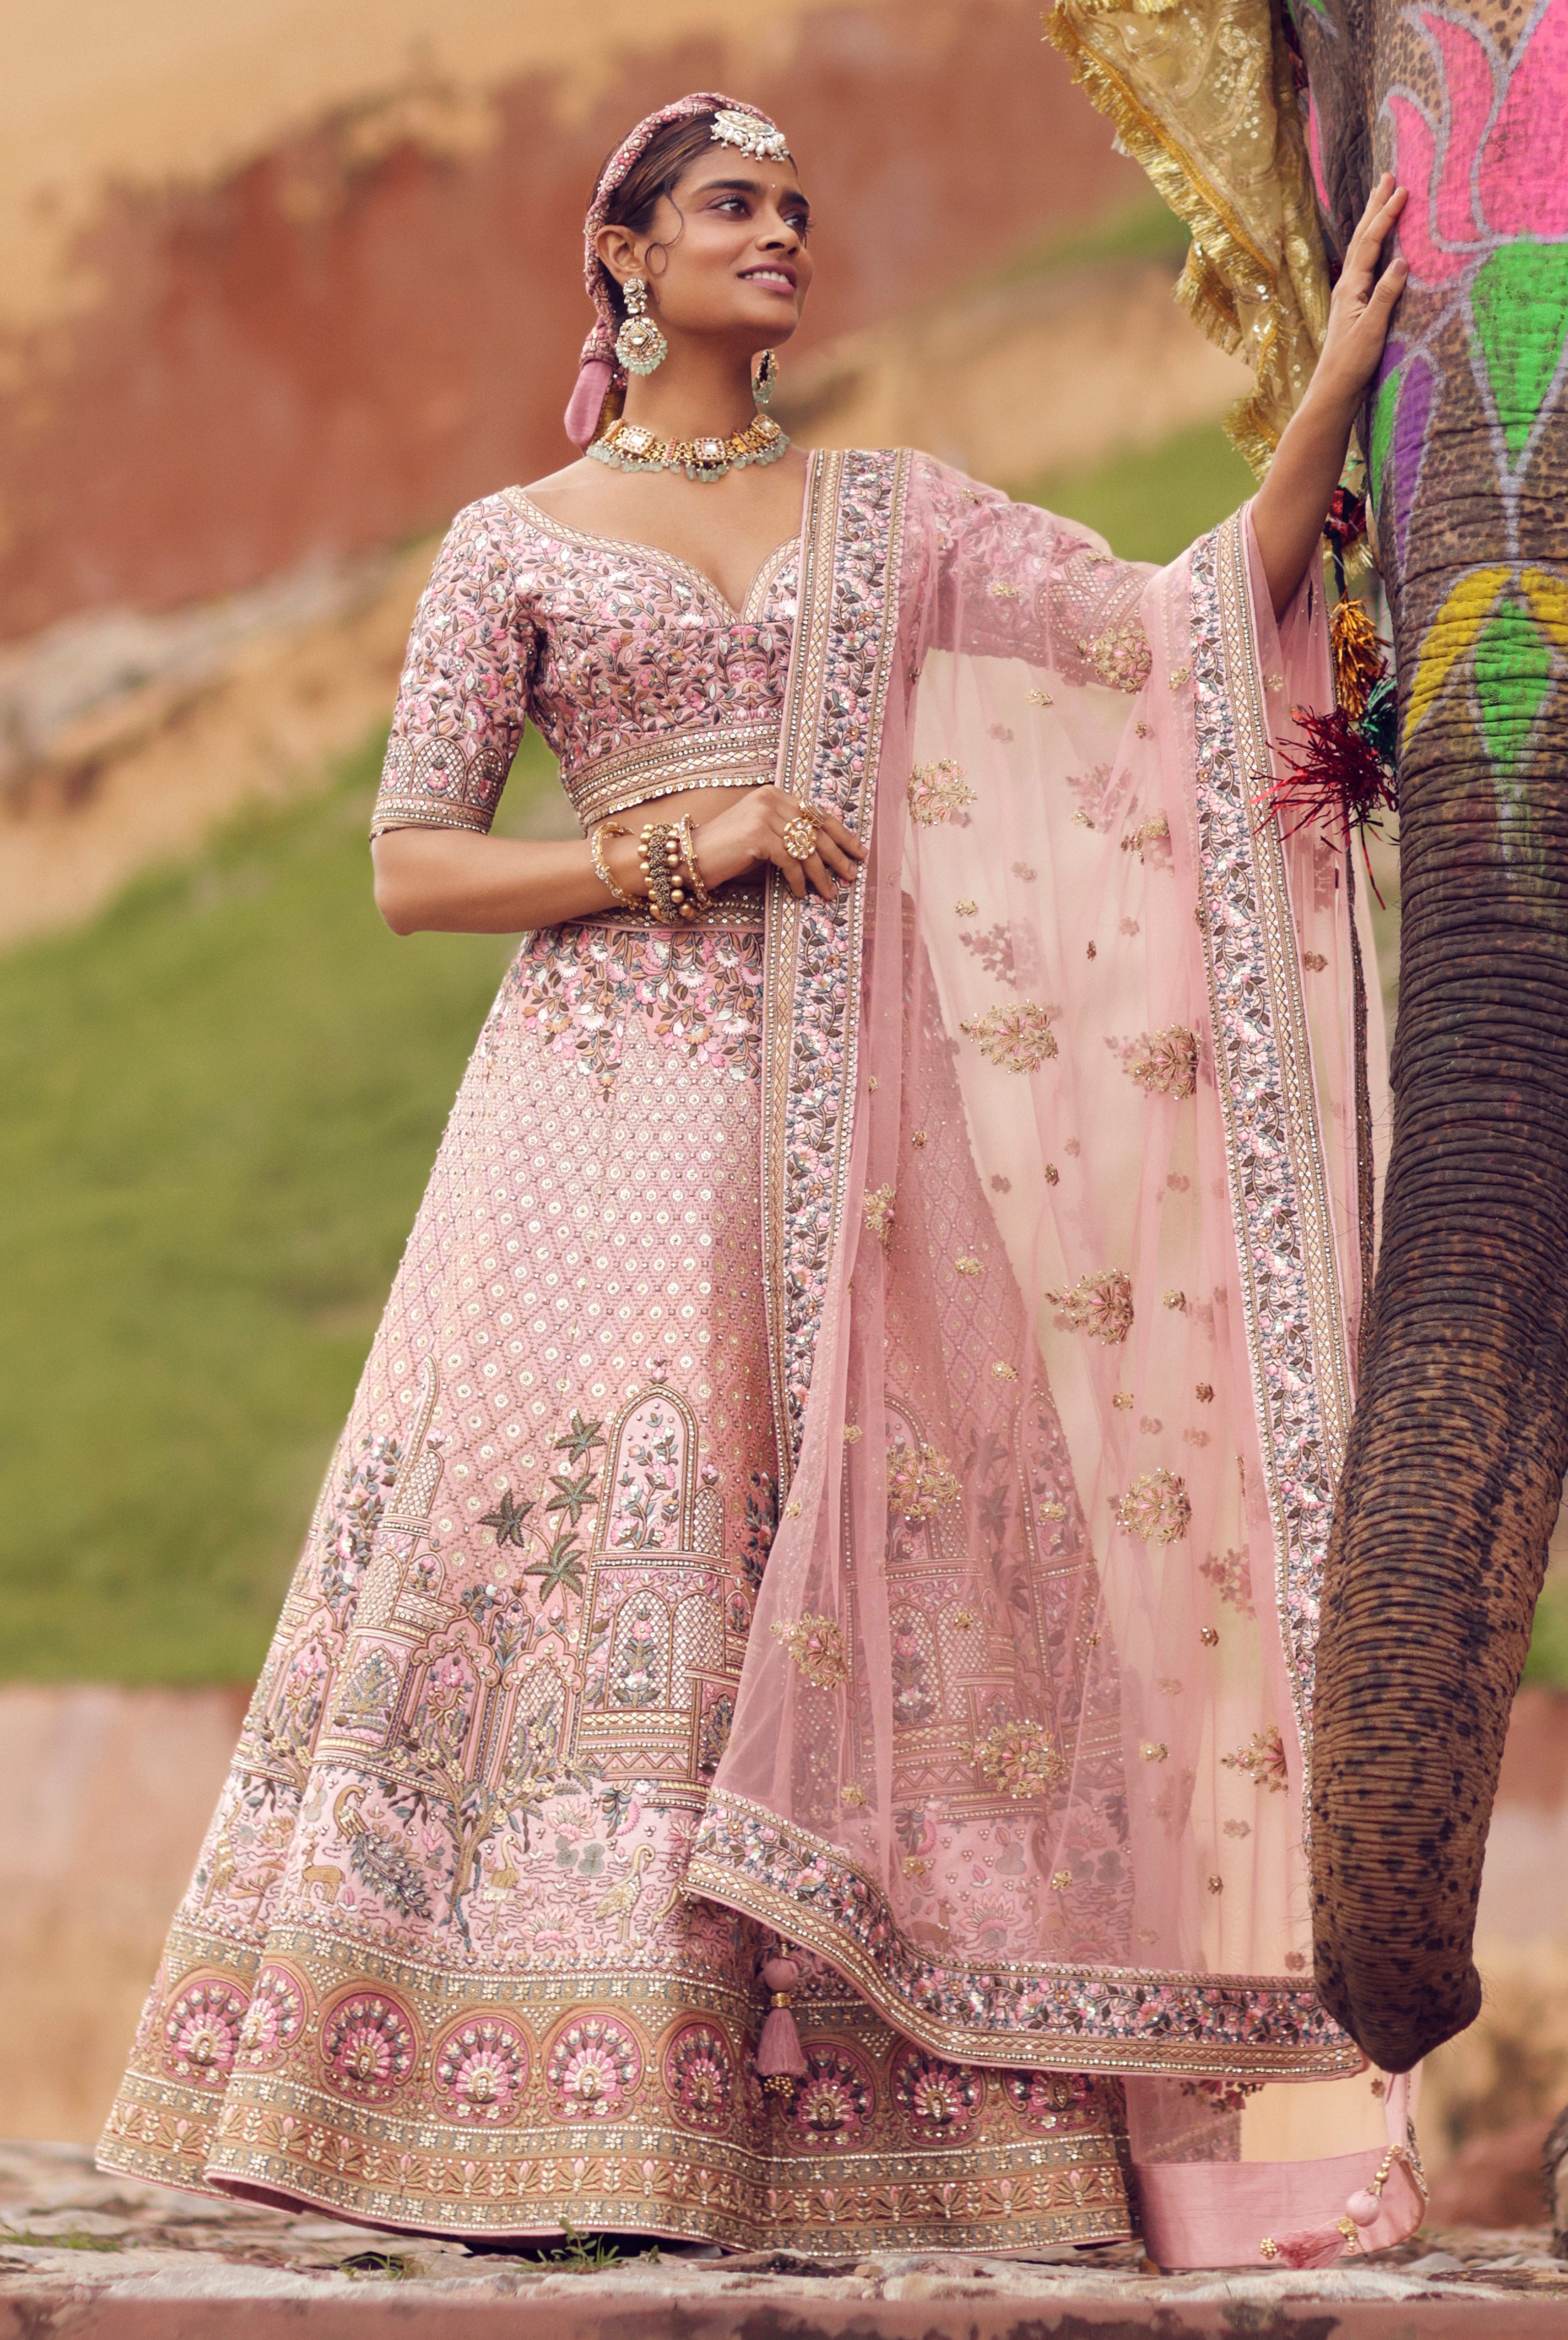 Pearl White Embroidered Bridal Lehenga In Raw Silk – paanericlothing